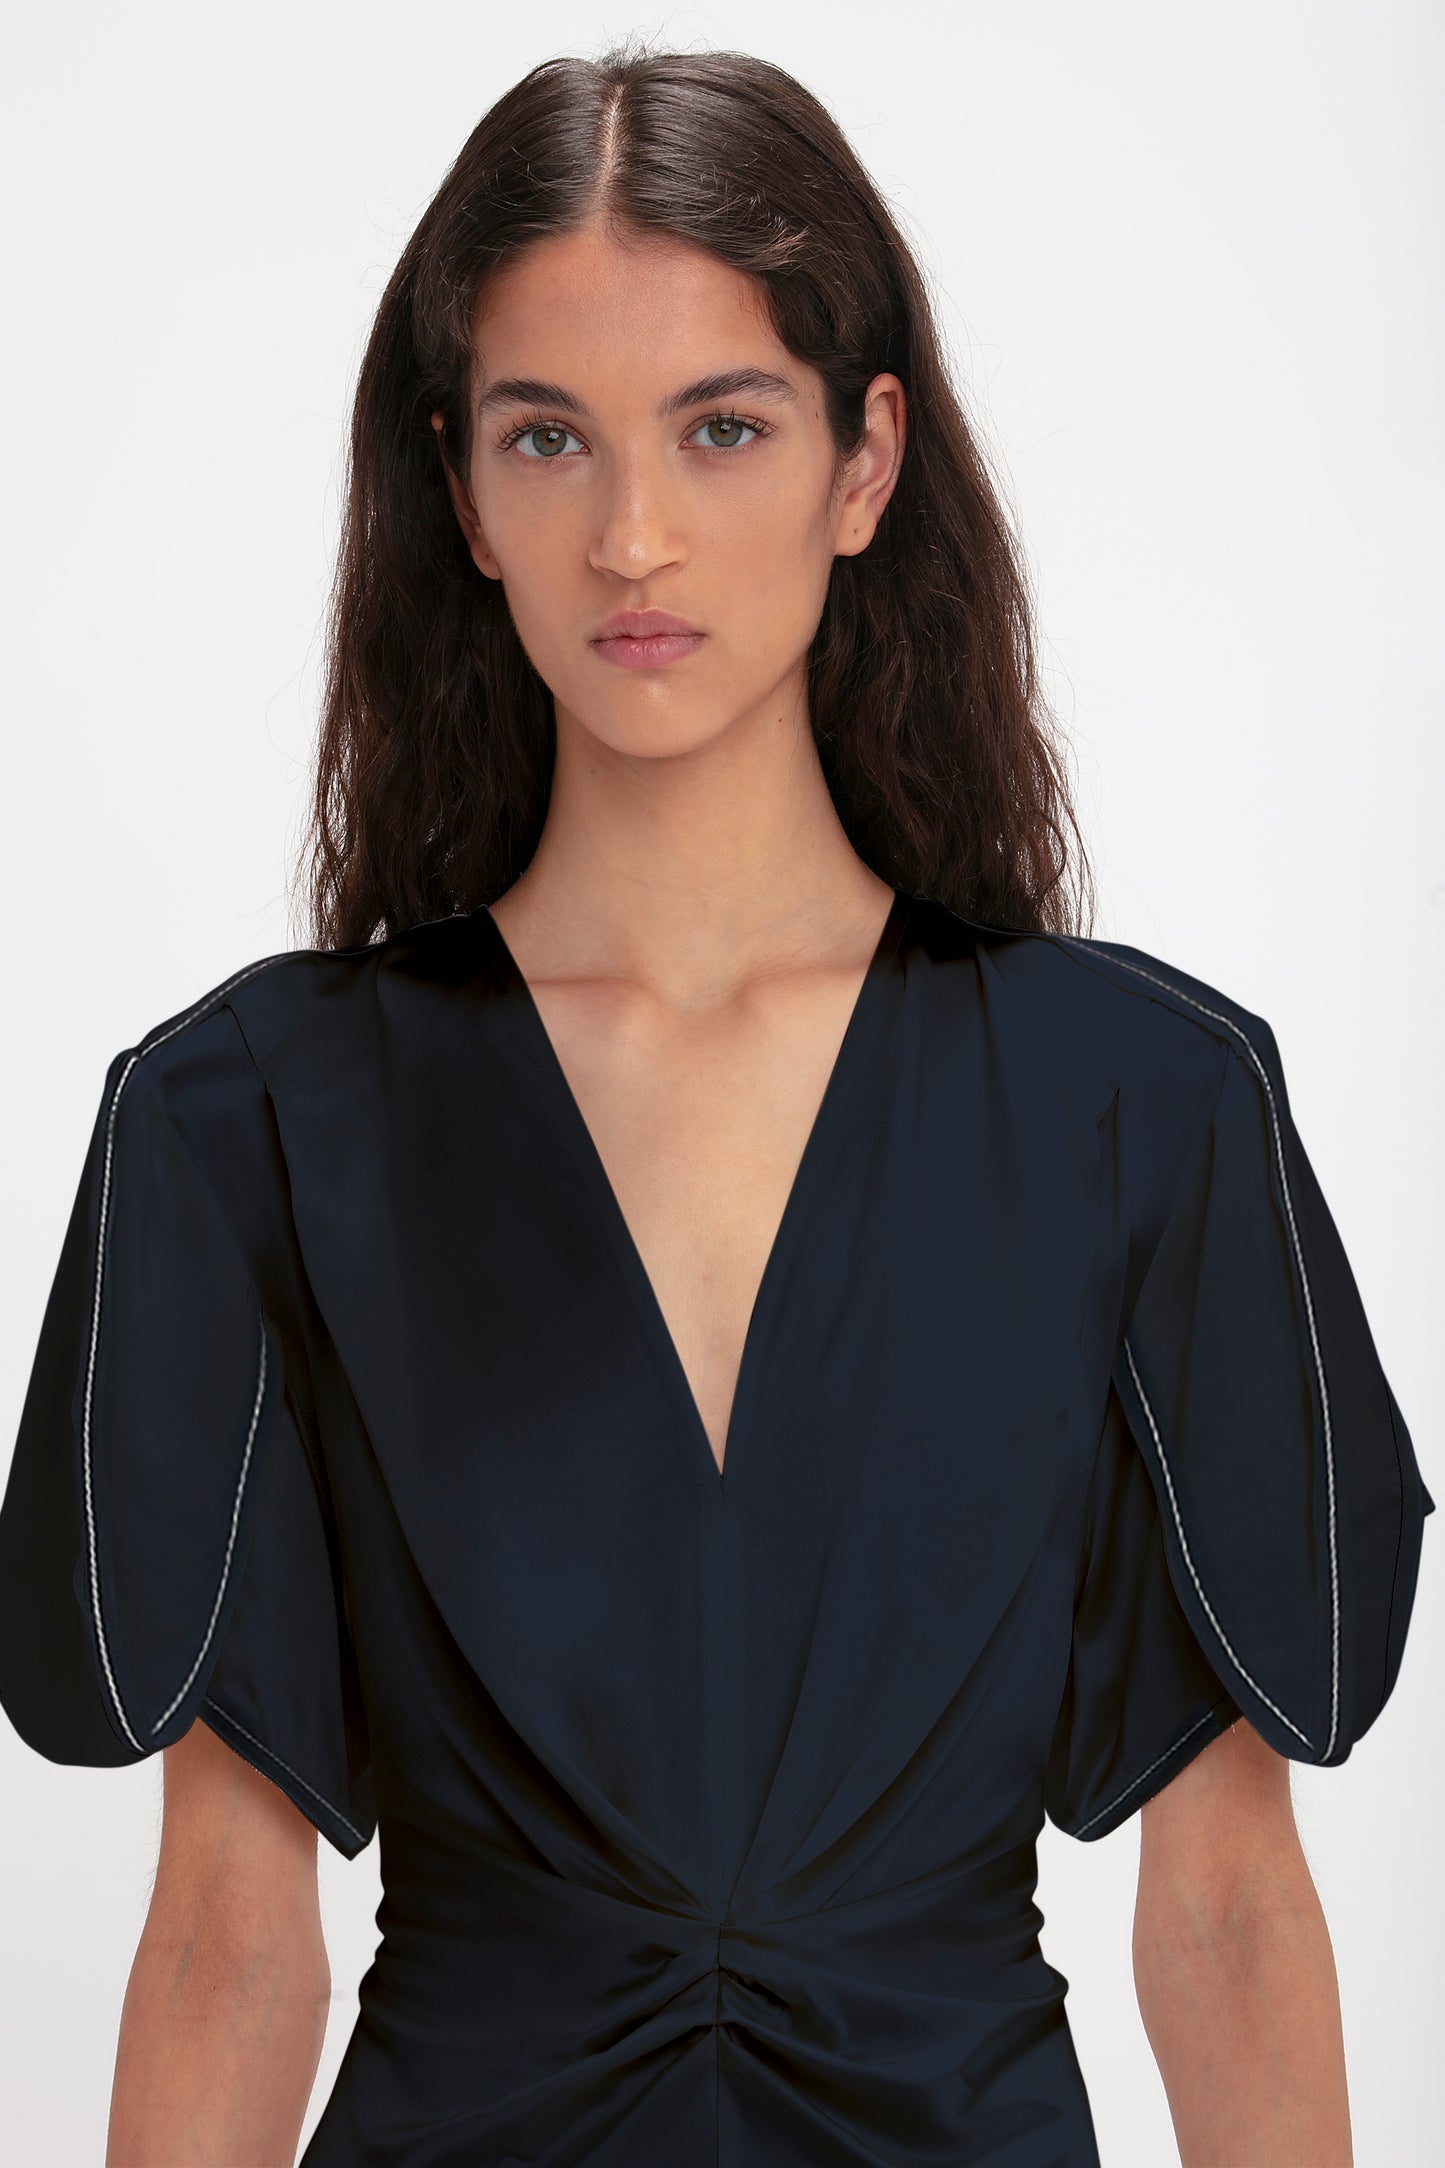 A woman with shoulder-length brown hair, wearing a dark Victoria Beckham Exclusive Gathered V-Neck Midi Dress In Navy with puffed sleeves, looking directly at the camera.